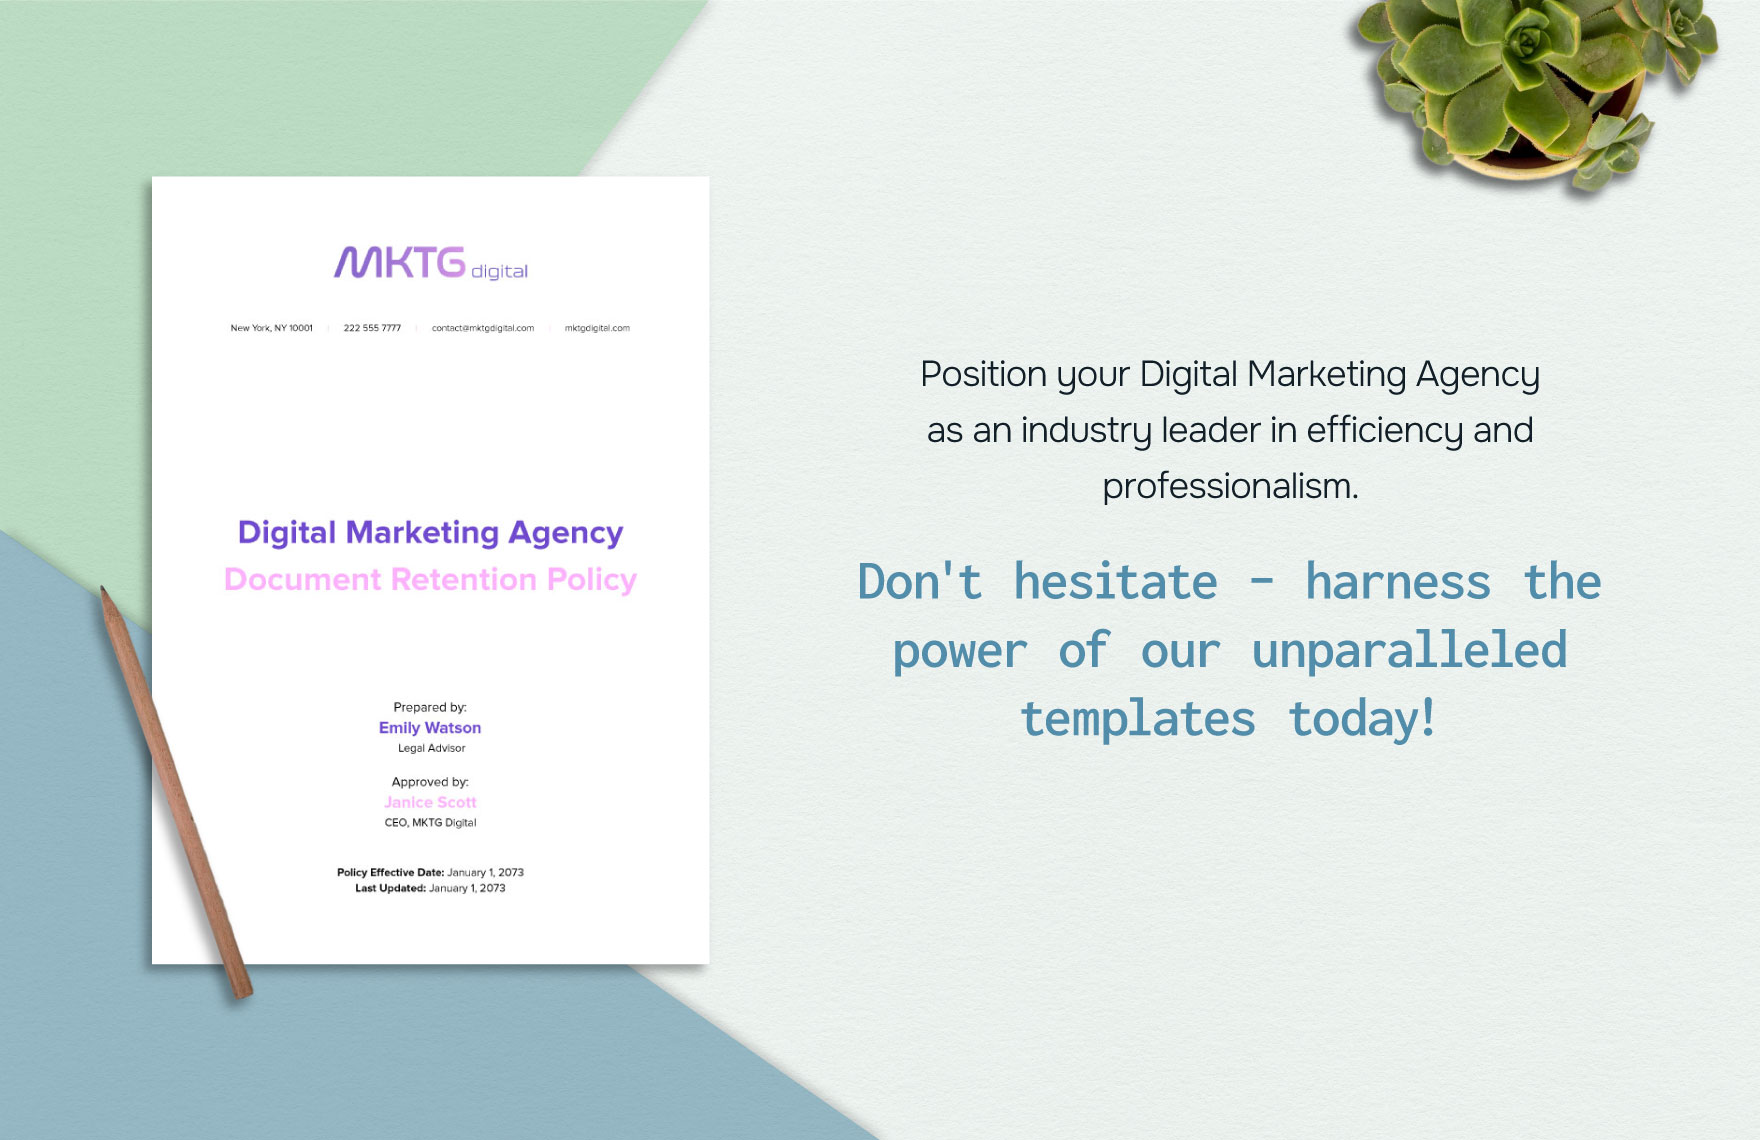 Digital Marketing Agency Document Retention Policy Template